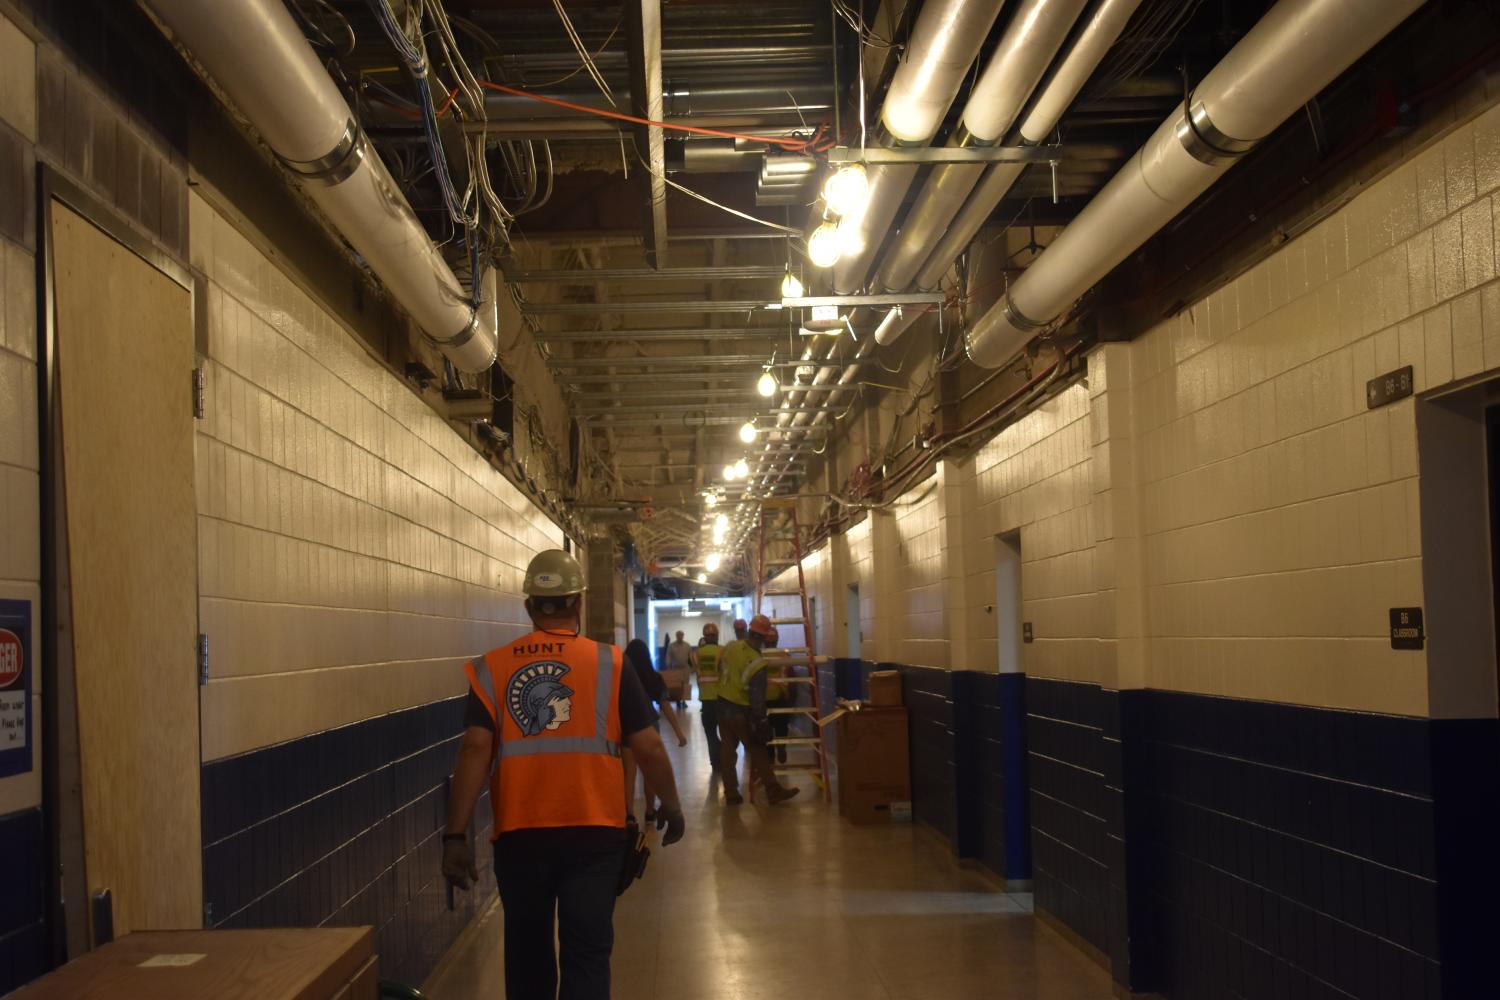 Construction workers were captured in action in the B hallway on September 21st. 